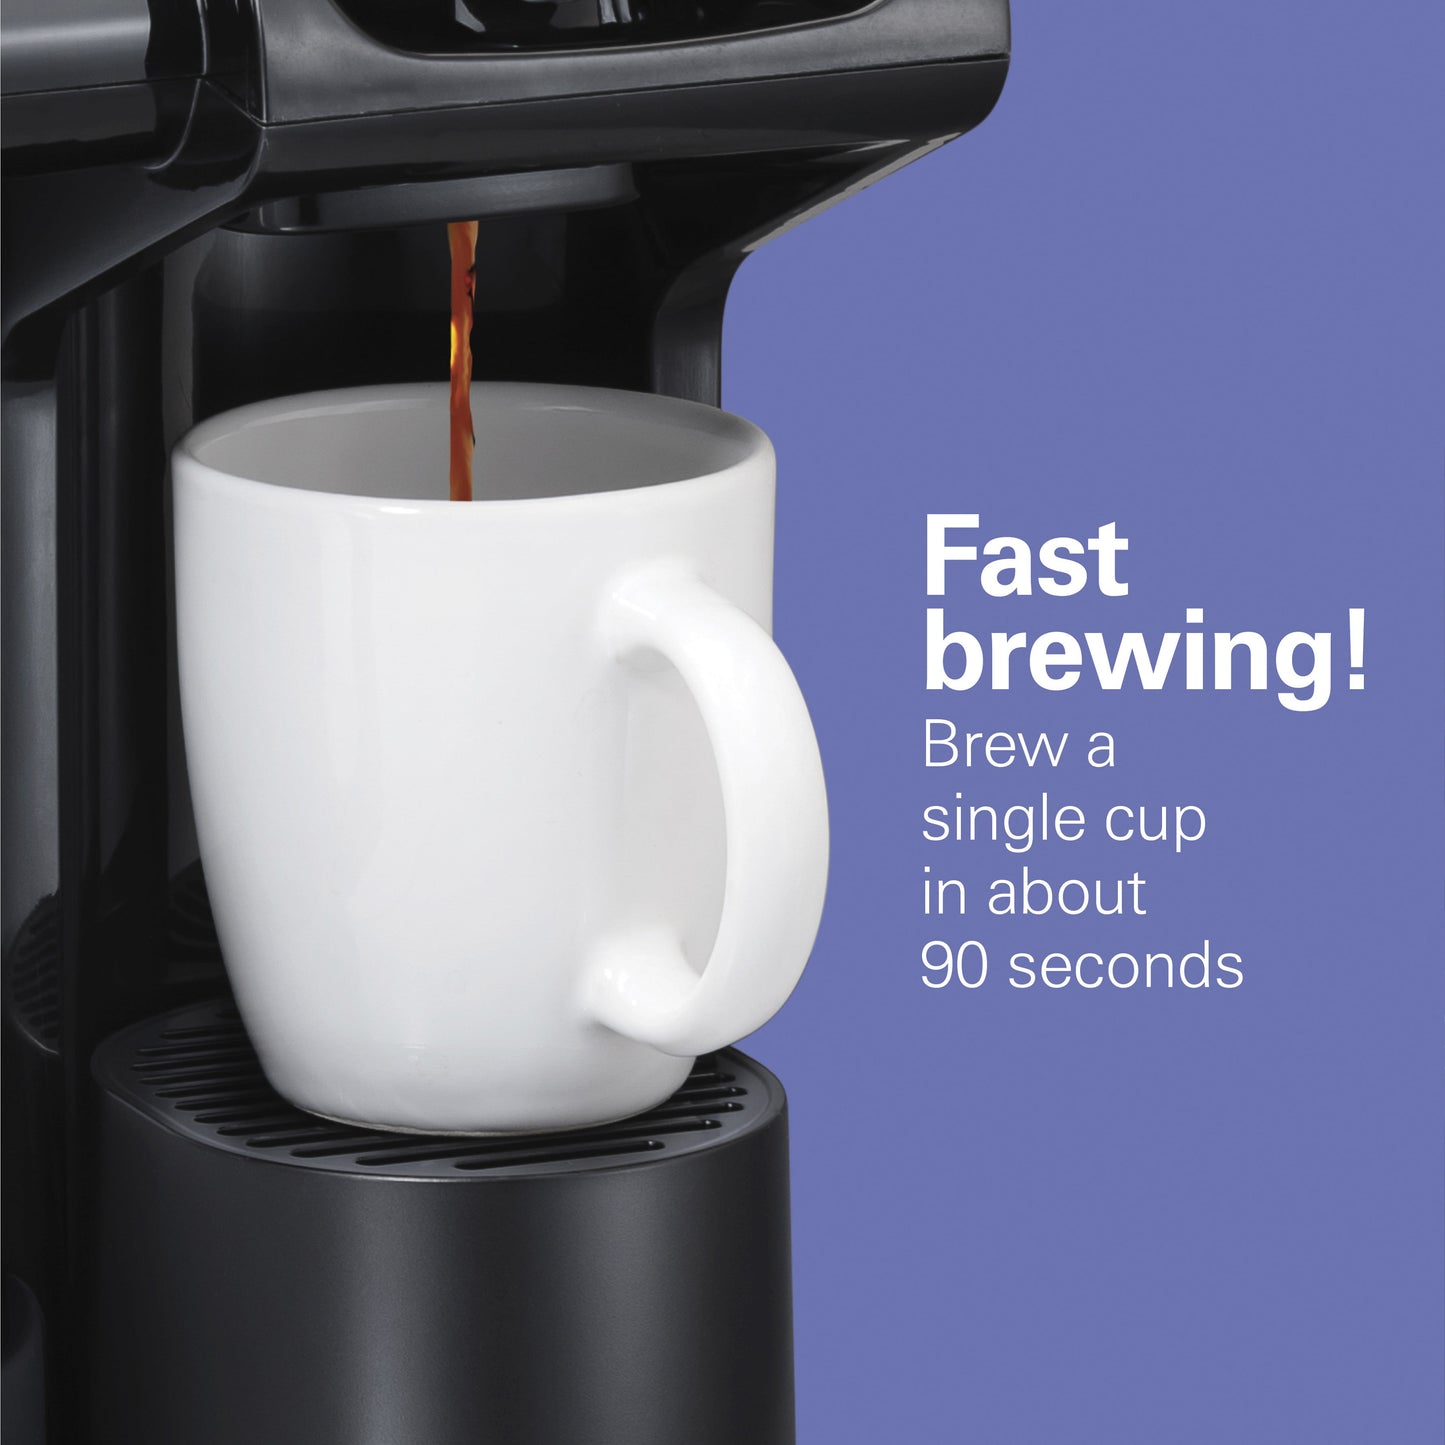 Bodum Pour Over Coffee Maker with Permanent Filter - Black - 34 oz.